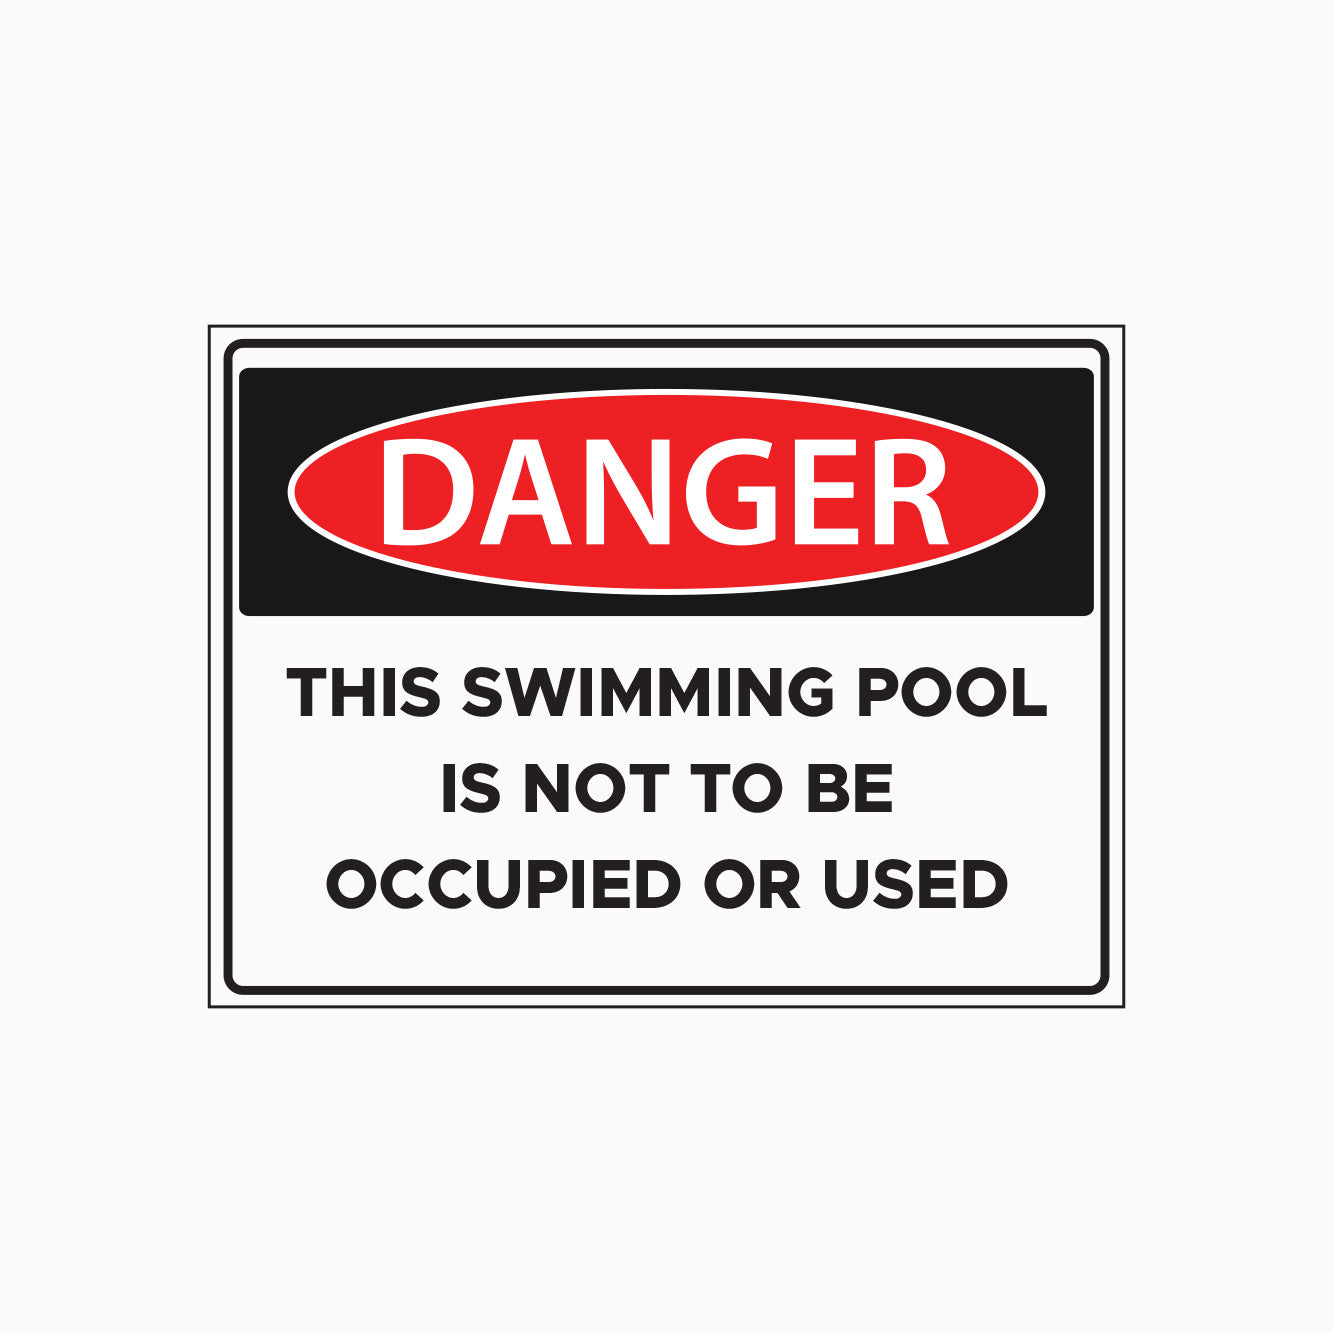 DANGER SIGN - THIS SWIMMING POOL IS NOT TO BE OCCUPIED OR USED SIGN